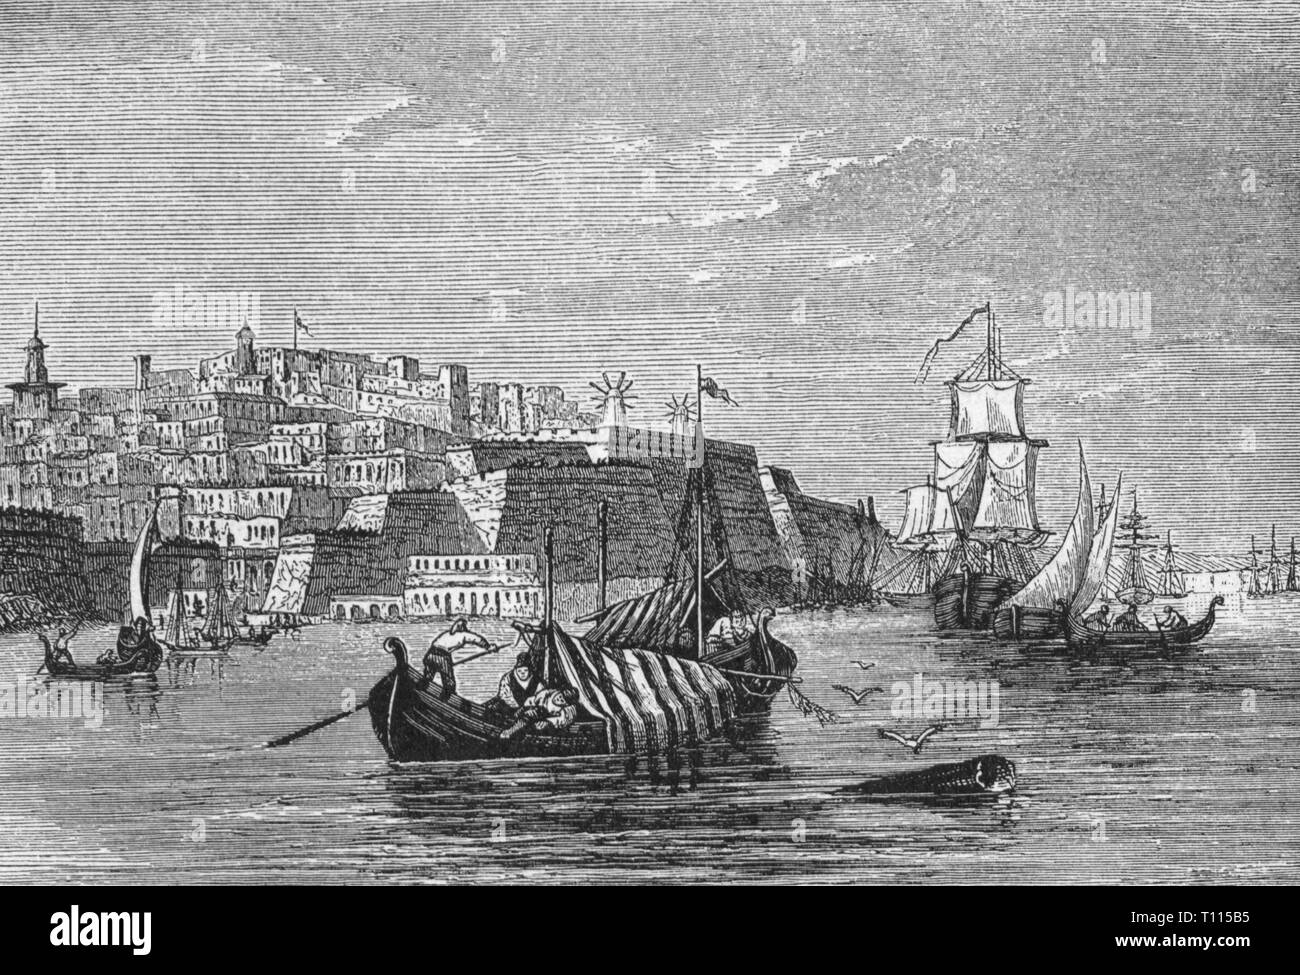 historic geography / travel, Malta, cities and communities, Valetta, view, wood engraving based on drawing by Bertrand, 2nd half 19th century, city, harbour, harbor, harbours, harbors, port, ports, fort, forts, fortress, fortresses, fortification, city fortifications, sea, seas, Mediterranean Sea, isle, islands, bay, bays, crown colony British, colony, colonies, Great Britain, British Empire, ransport, transportation, navigation, sailing ship, sailing ships, boat, boats, view, views, historic, historical, people, Artist's Copyright has not to be cleared Stock Photo